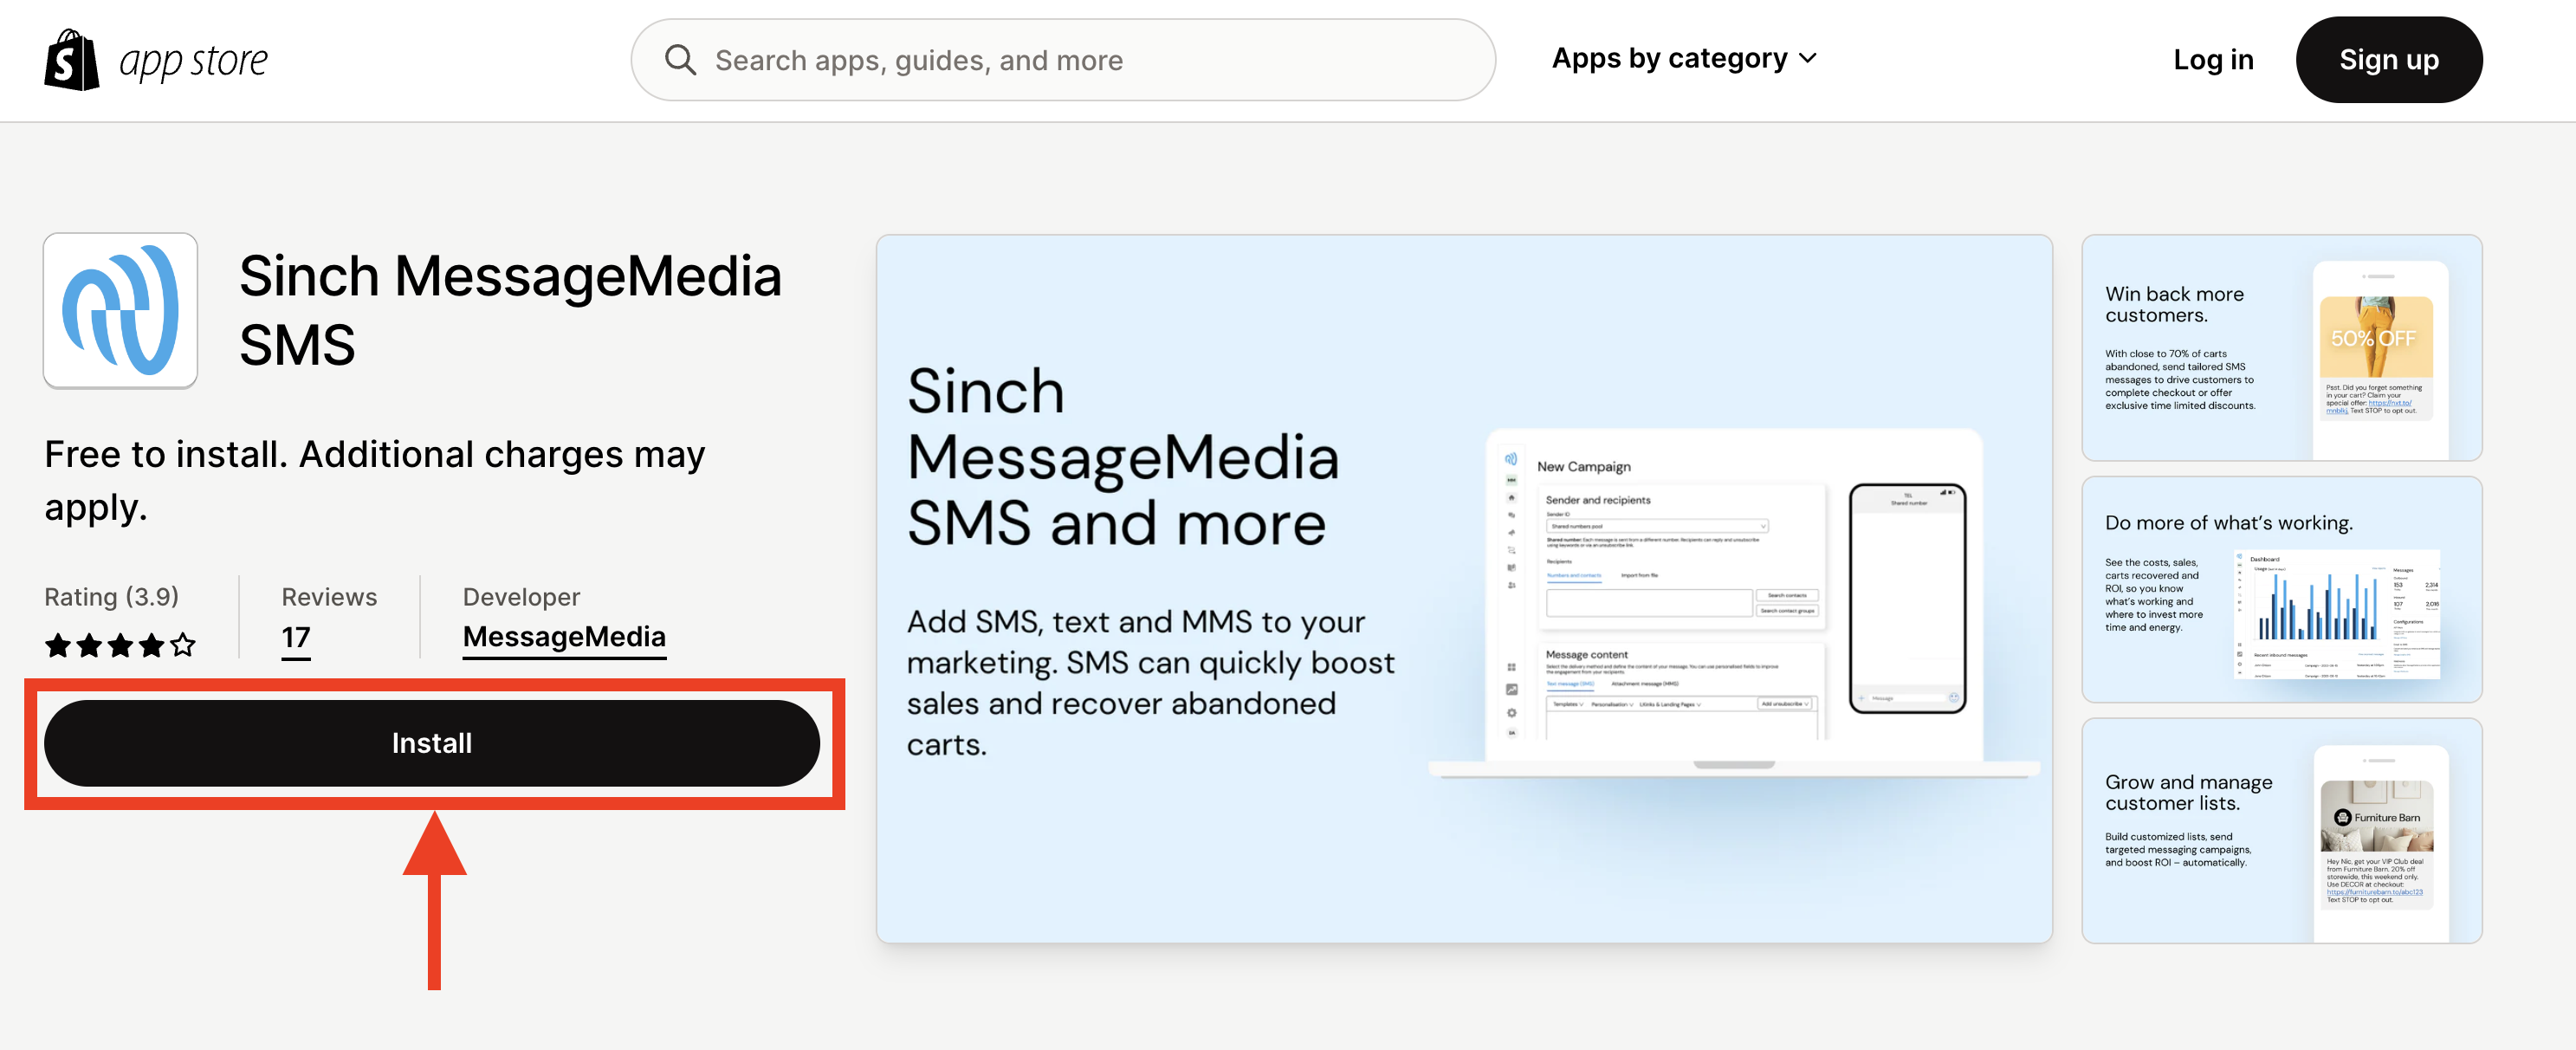 Shopify | How to install the Sinch MessageMedia app for Shopify_2.png